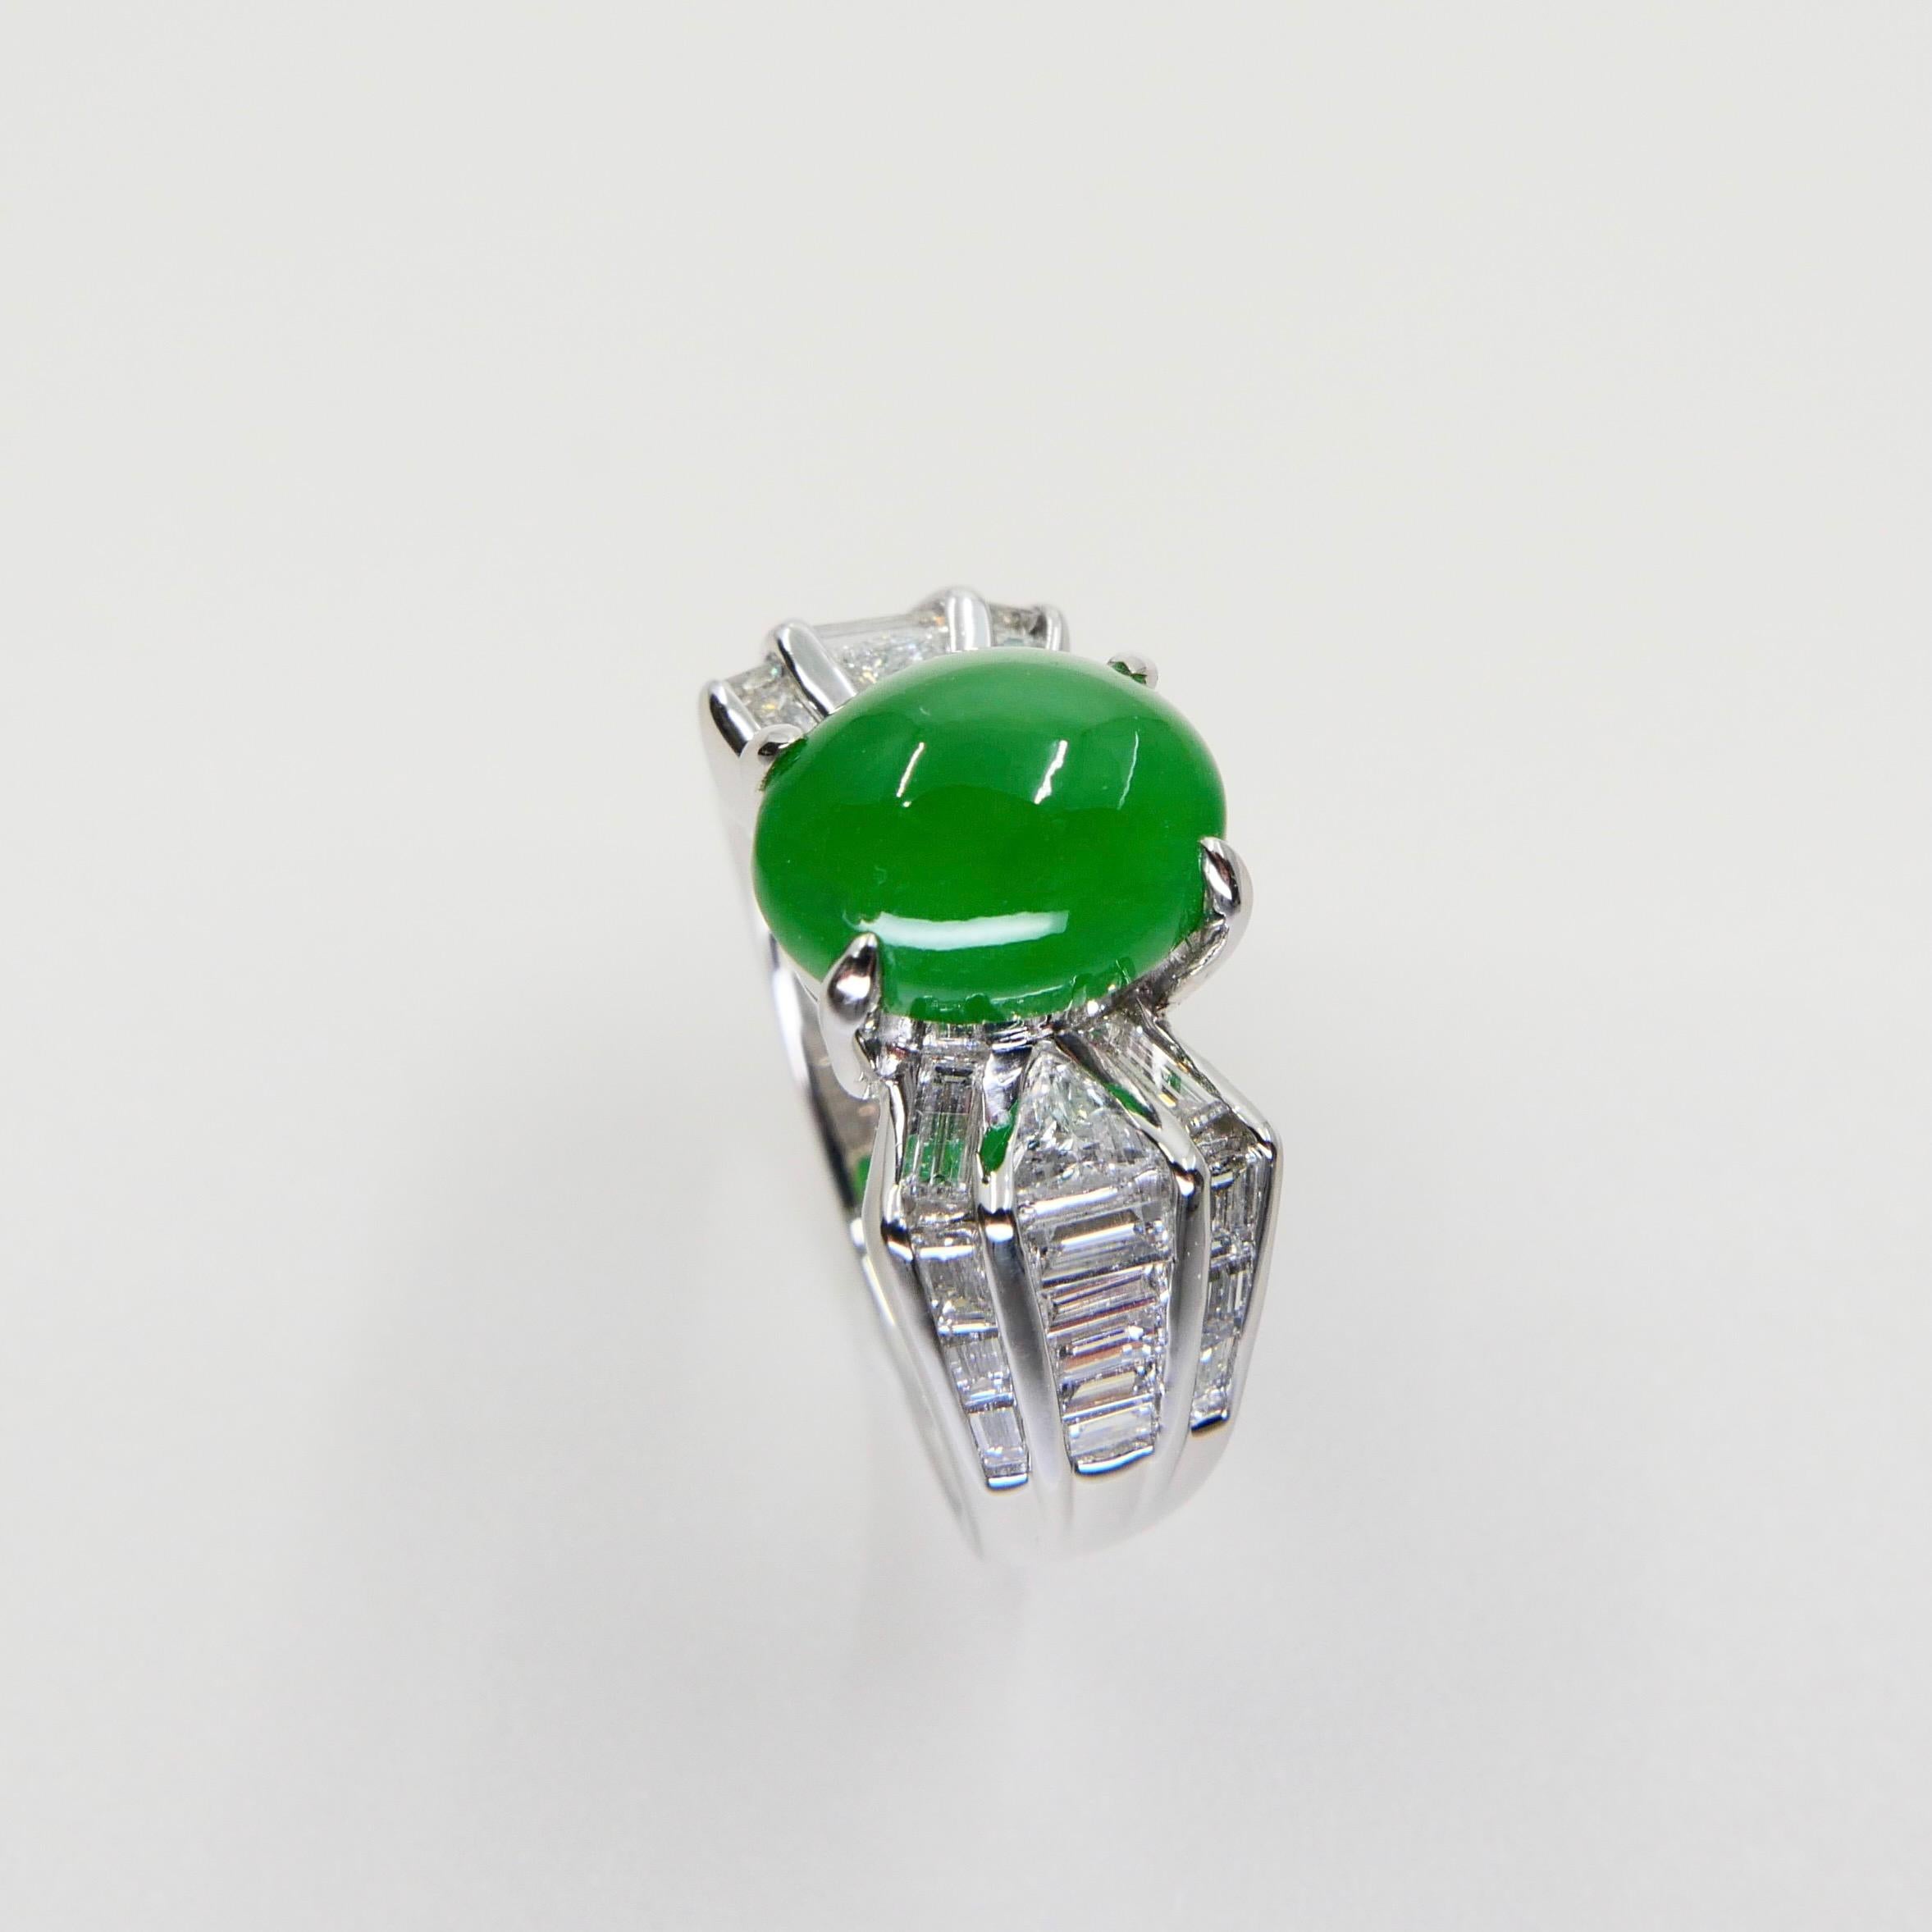 Oval Cut Certified 3.10 Carat Jade & Diamond Cocktail Ring, Apple Green with High Dome